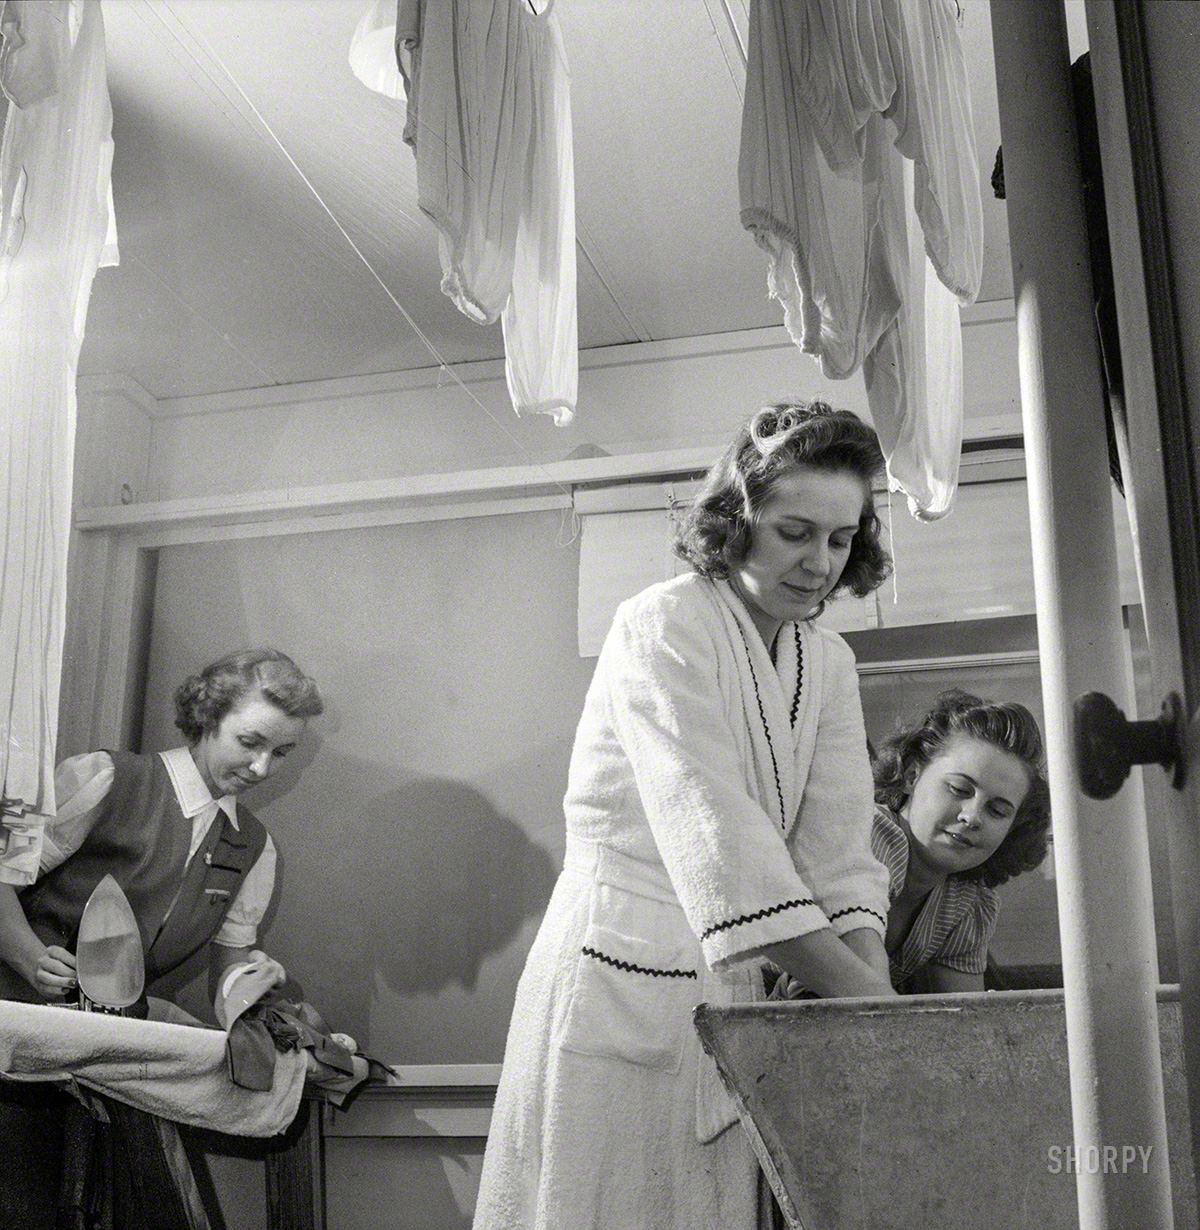 June 1943. "Arlington, Virginia. Washing clothes in one of the laundry rooms at Idaho Hall, Arlington Farms, war duration residence hall for women government workers." Photo by Esther Bubley, Office of War Information. View full size.